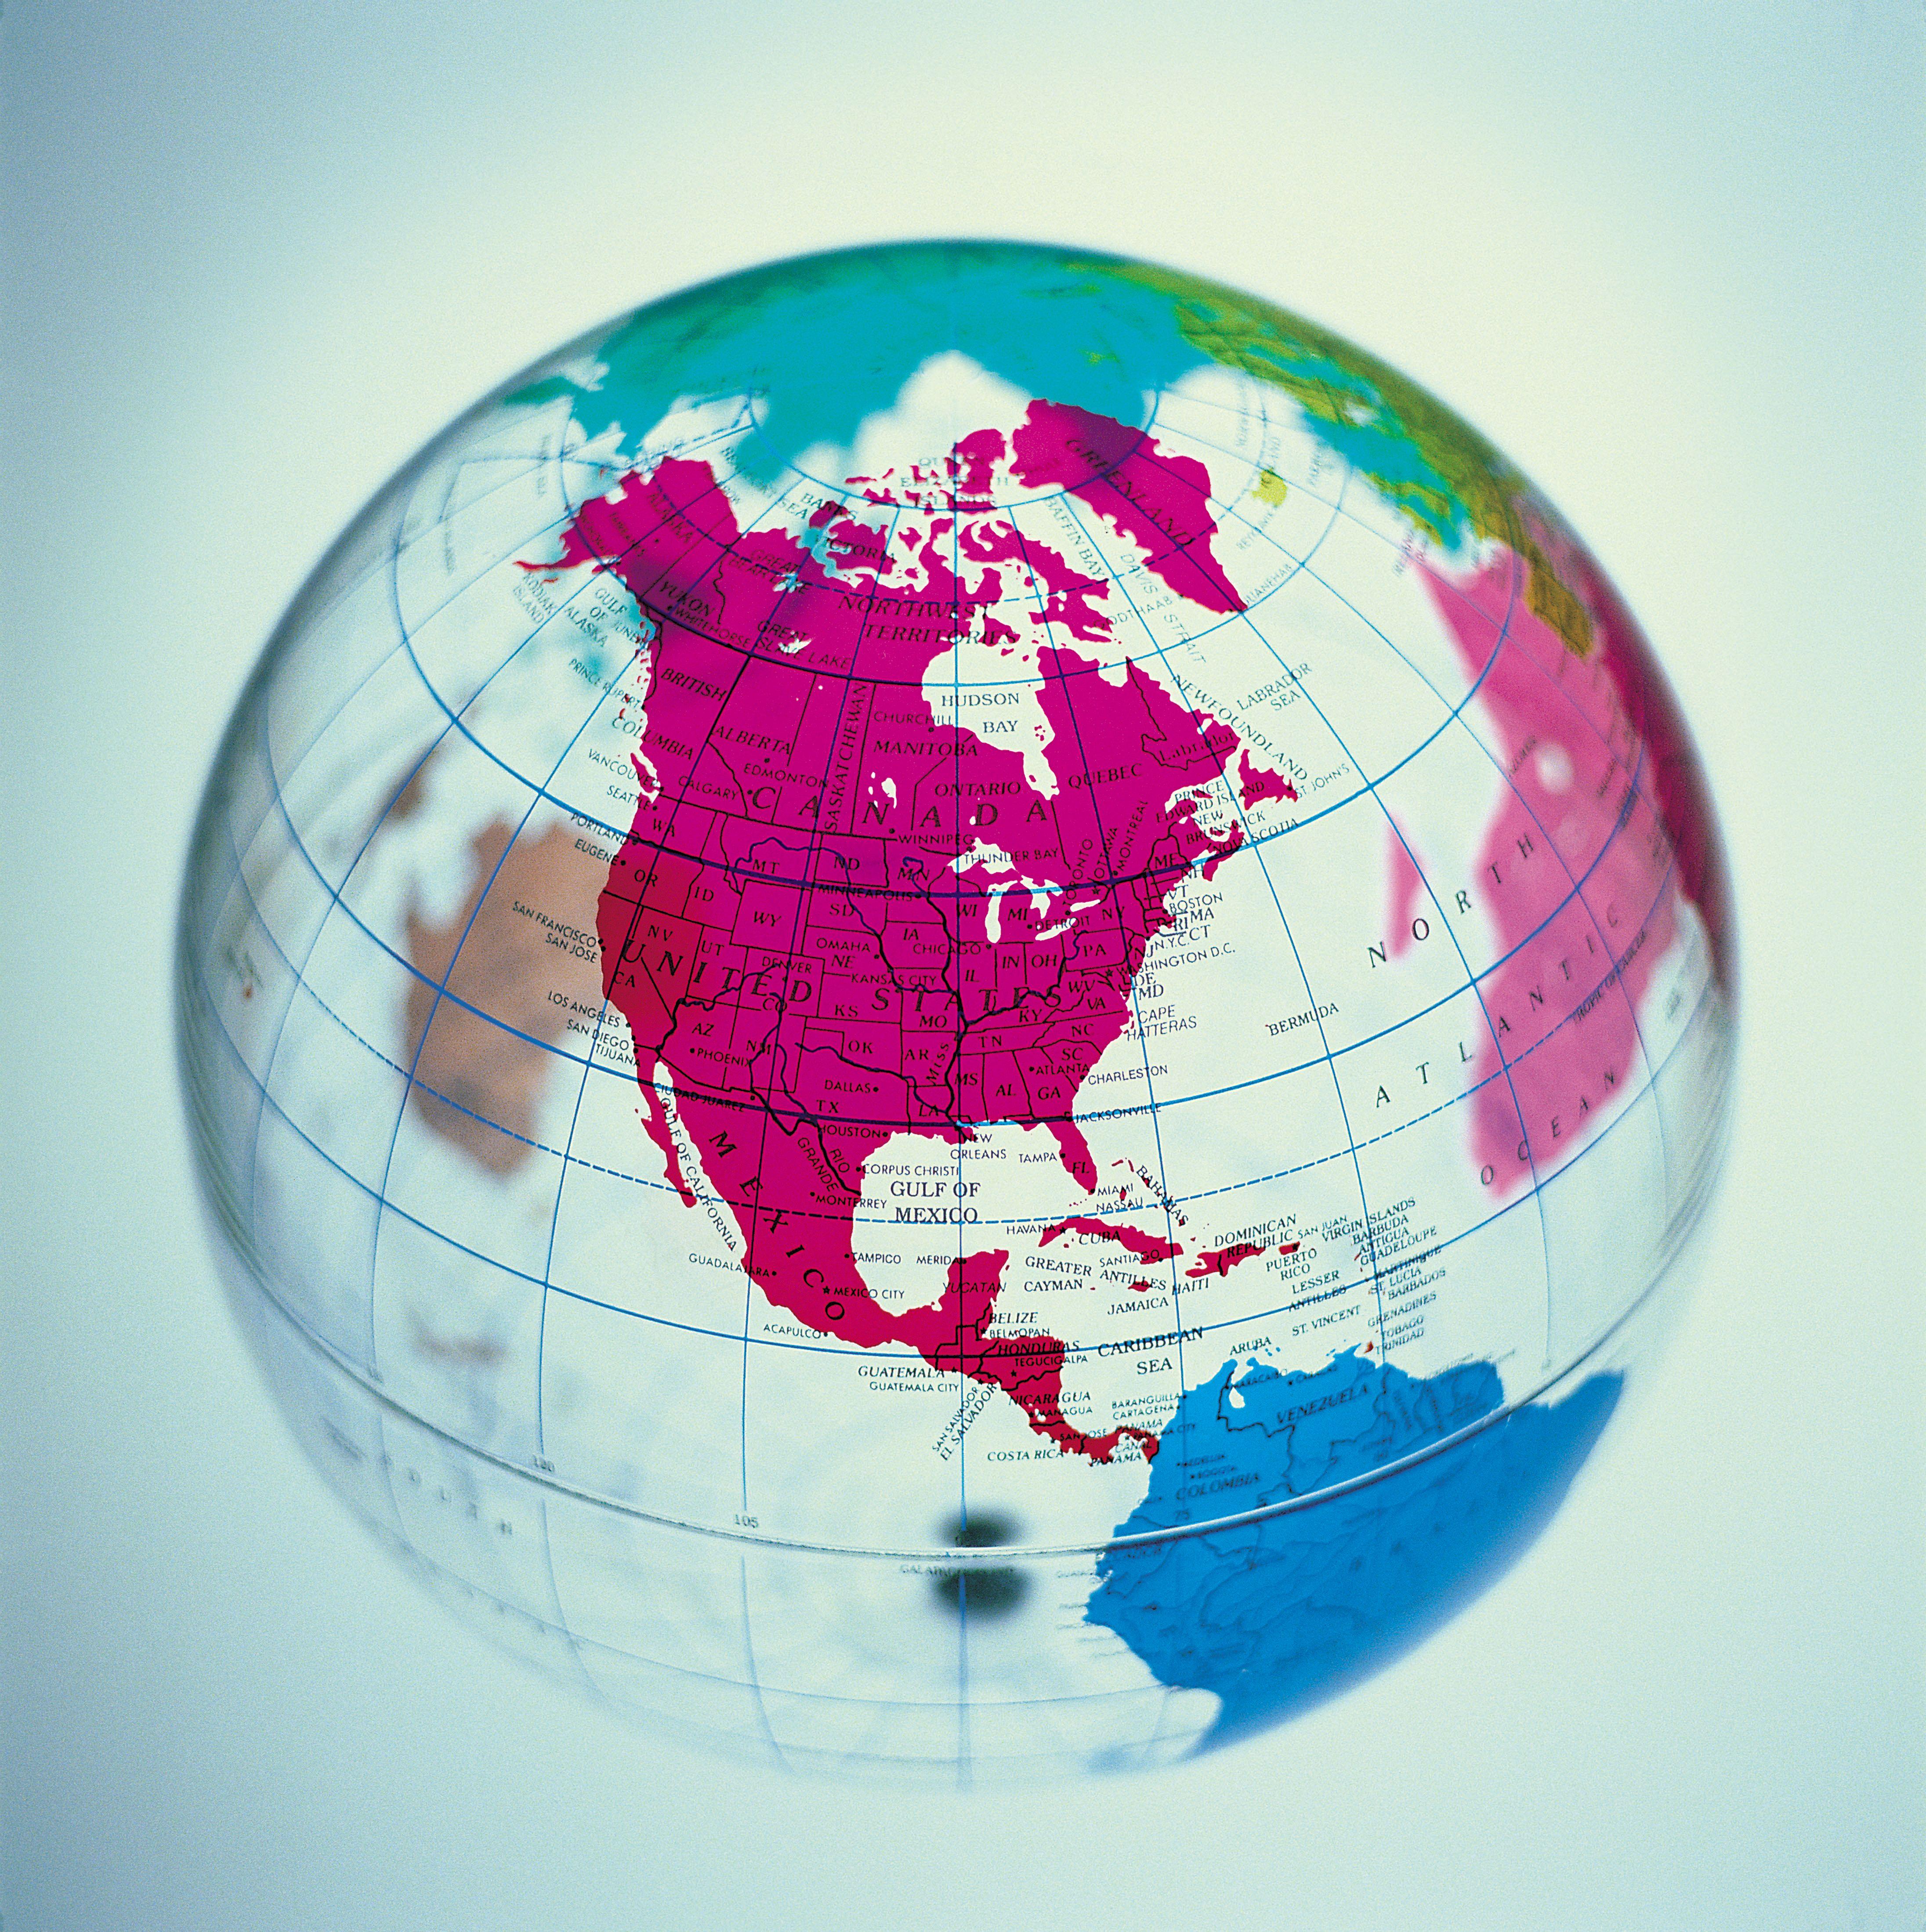 Canada Globe Logo - T Mobile Offers Free Calls And Data To Customers In Canada